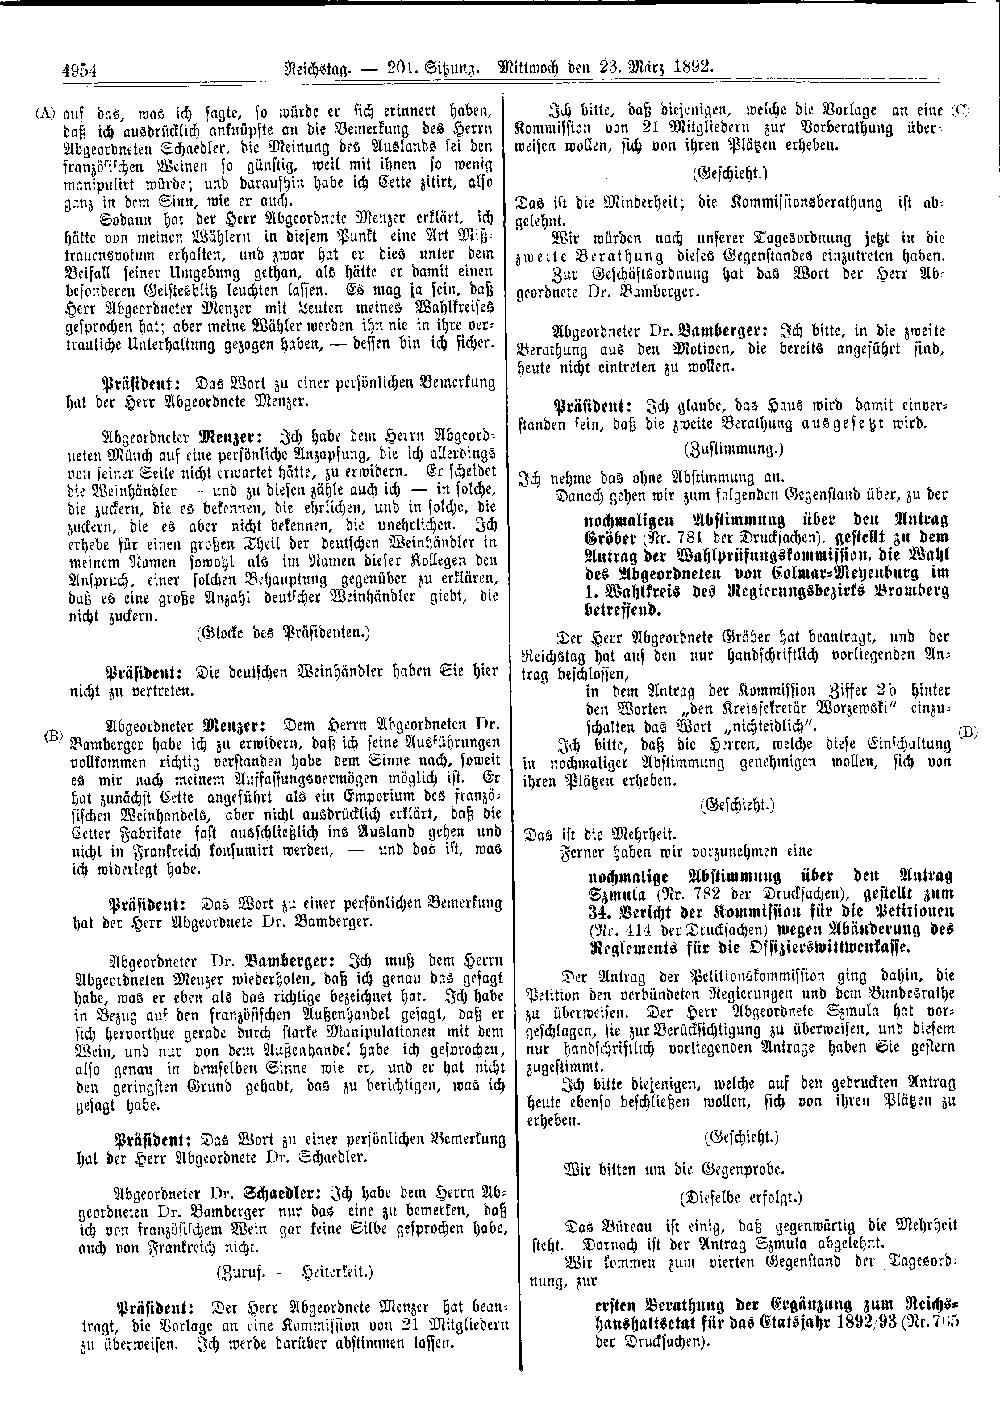 Scan of page 4954